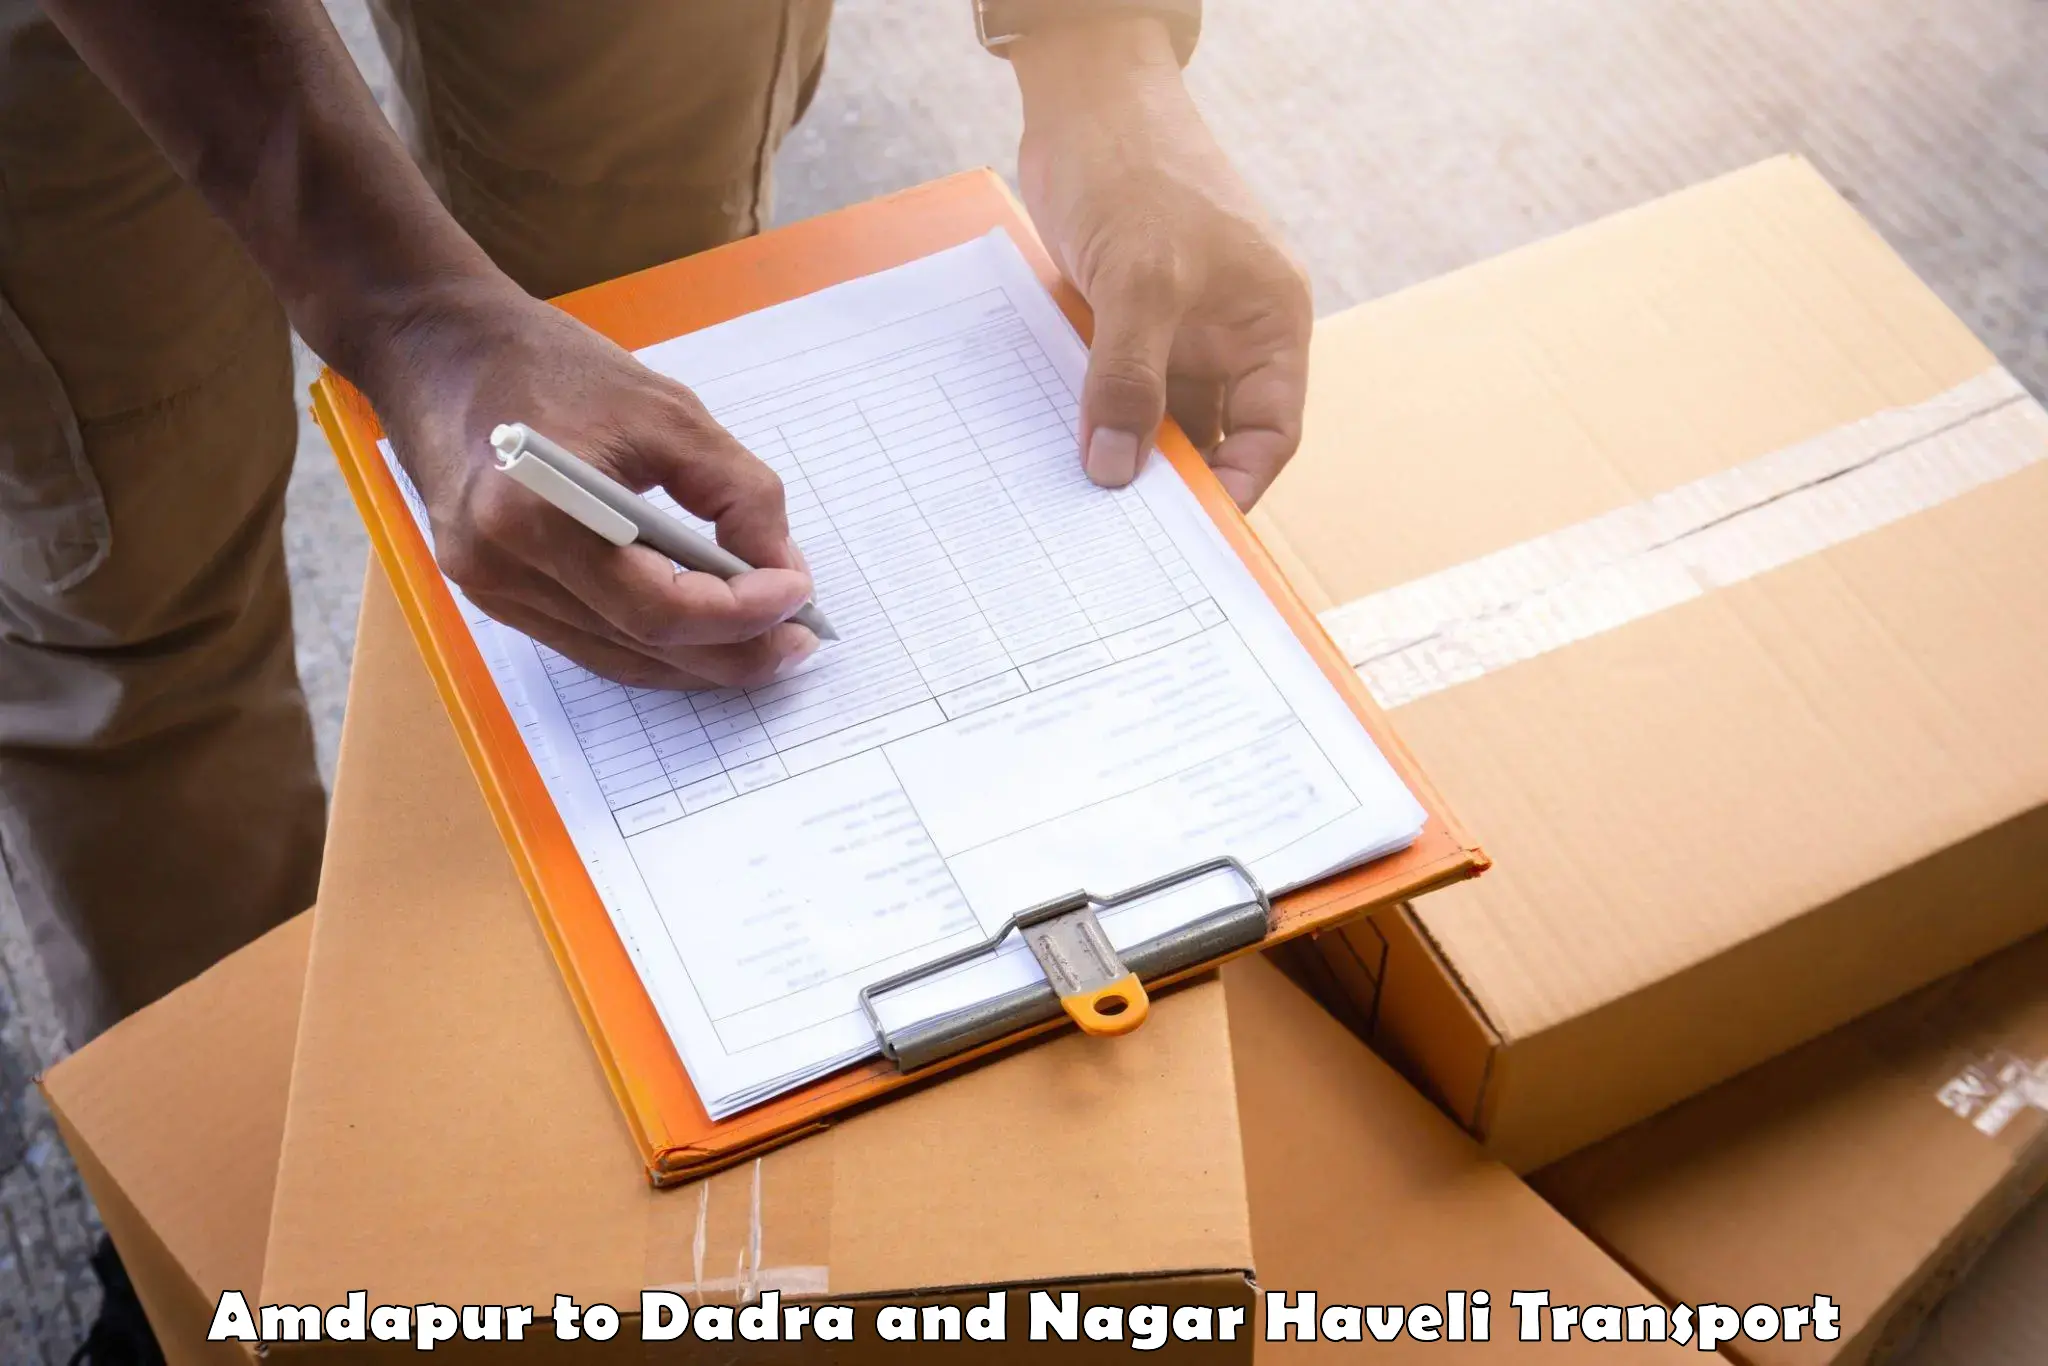 Material transport services Amdapur to Dadra and Nagar Haveli